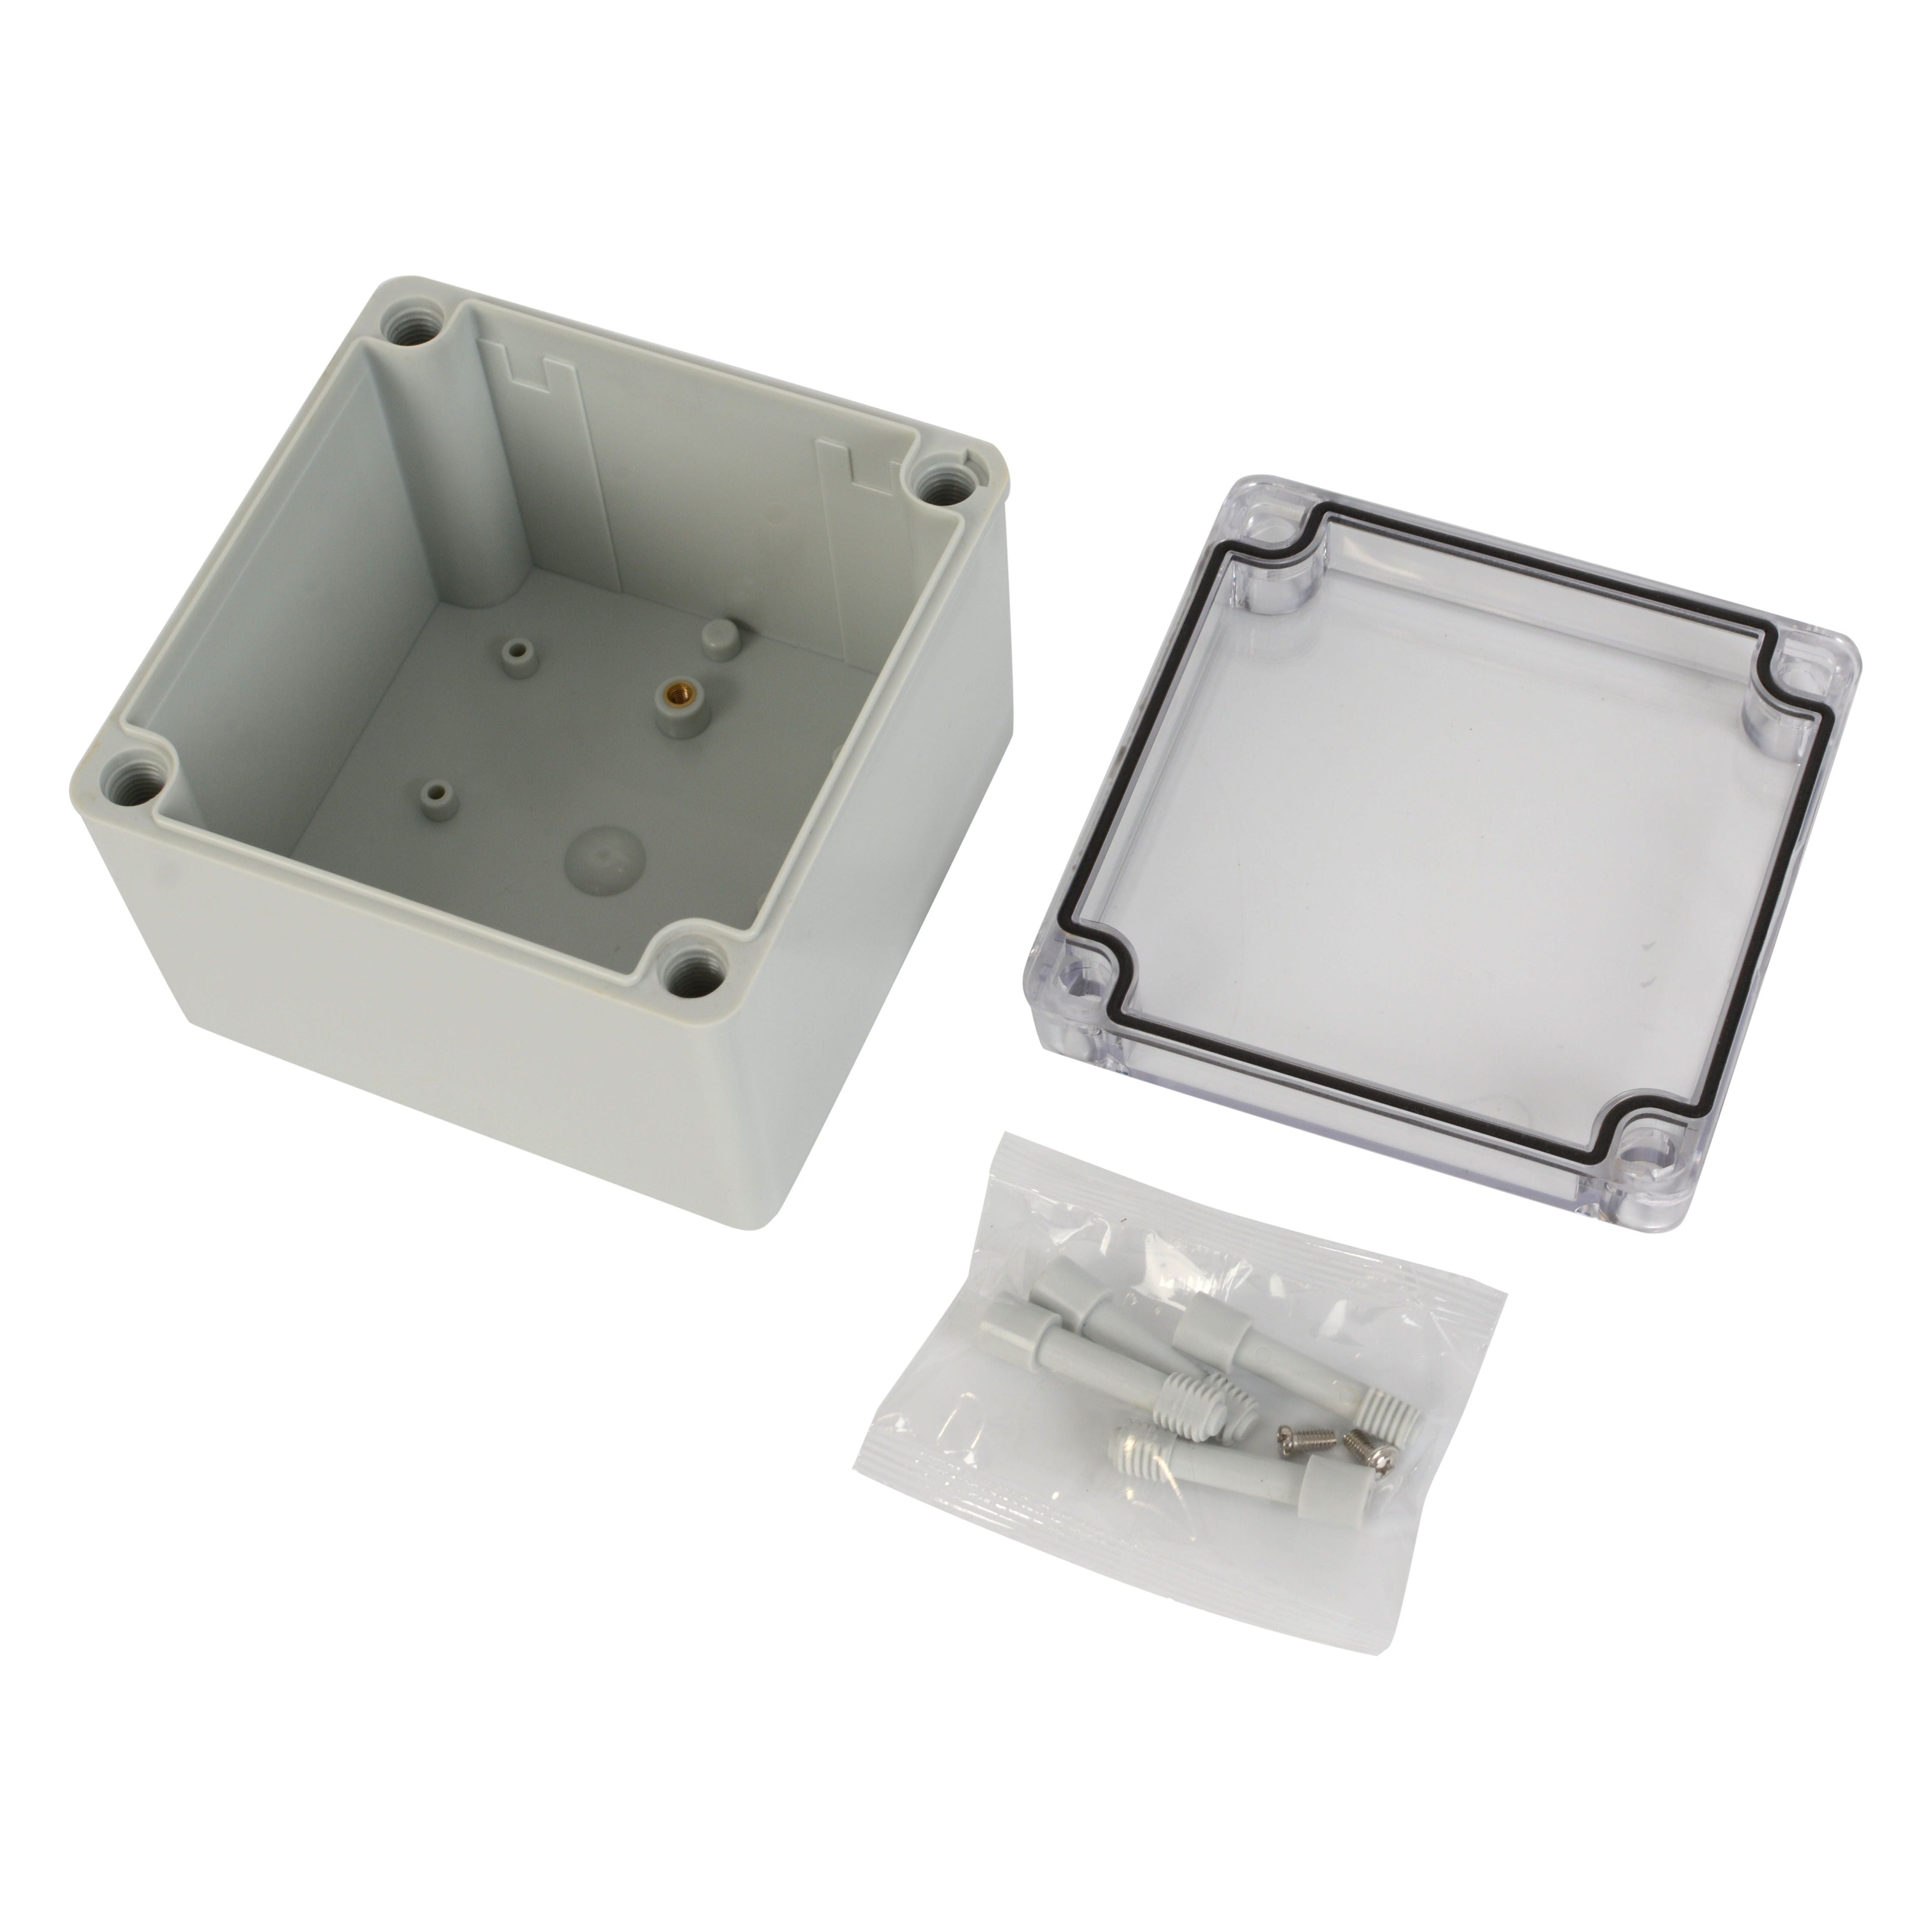 ABS IP66 Clear Lid Junction Box 125 x 125 x 100mm